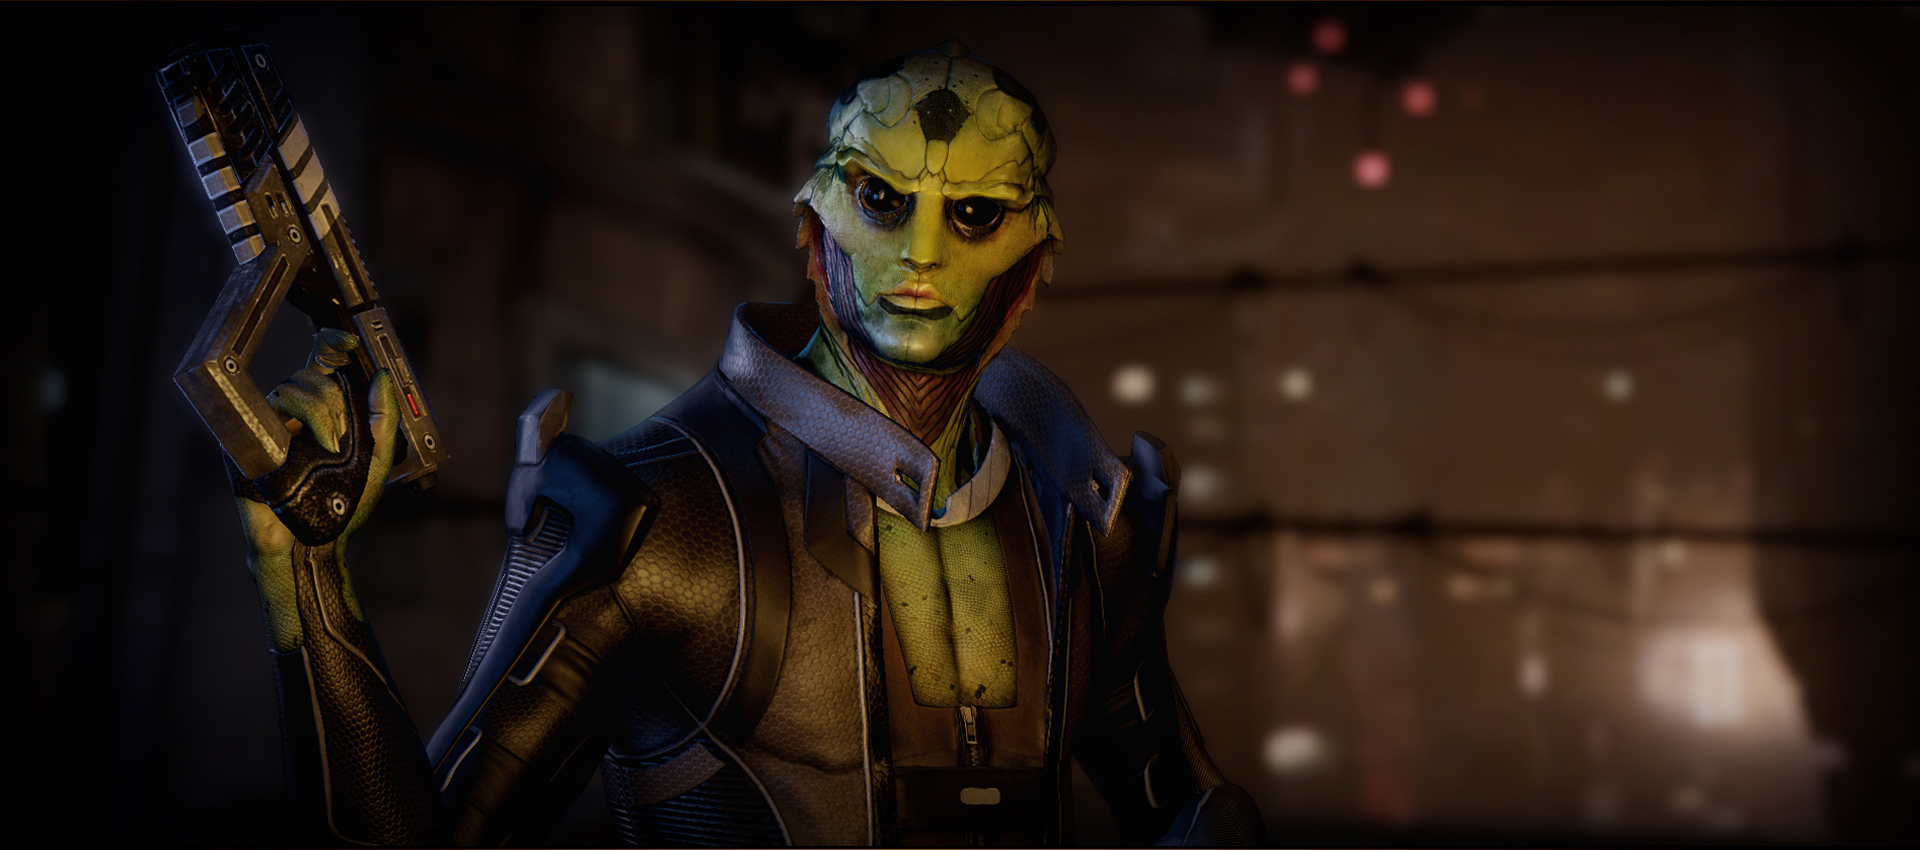 Download mobile wallpaper Thane Krios, Mass Effect 2, Mass Effect, Video Game for free.